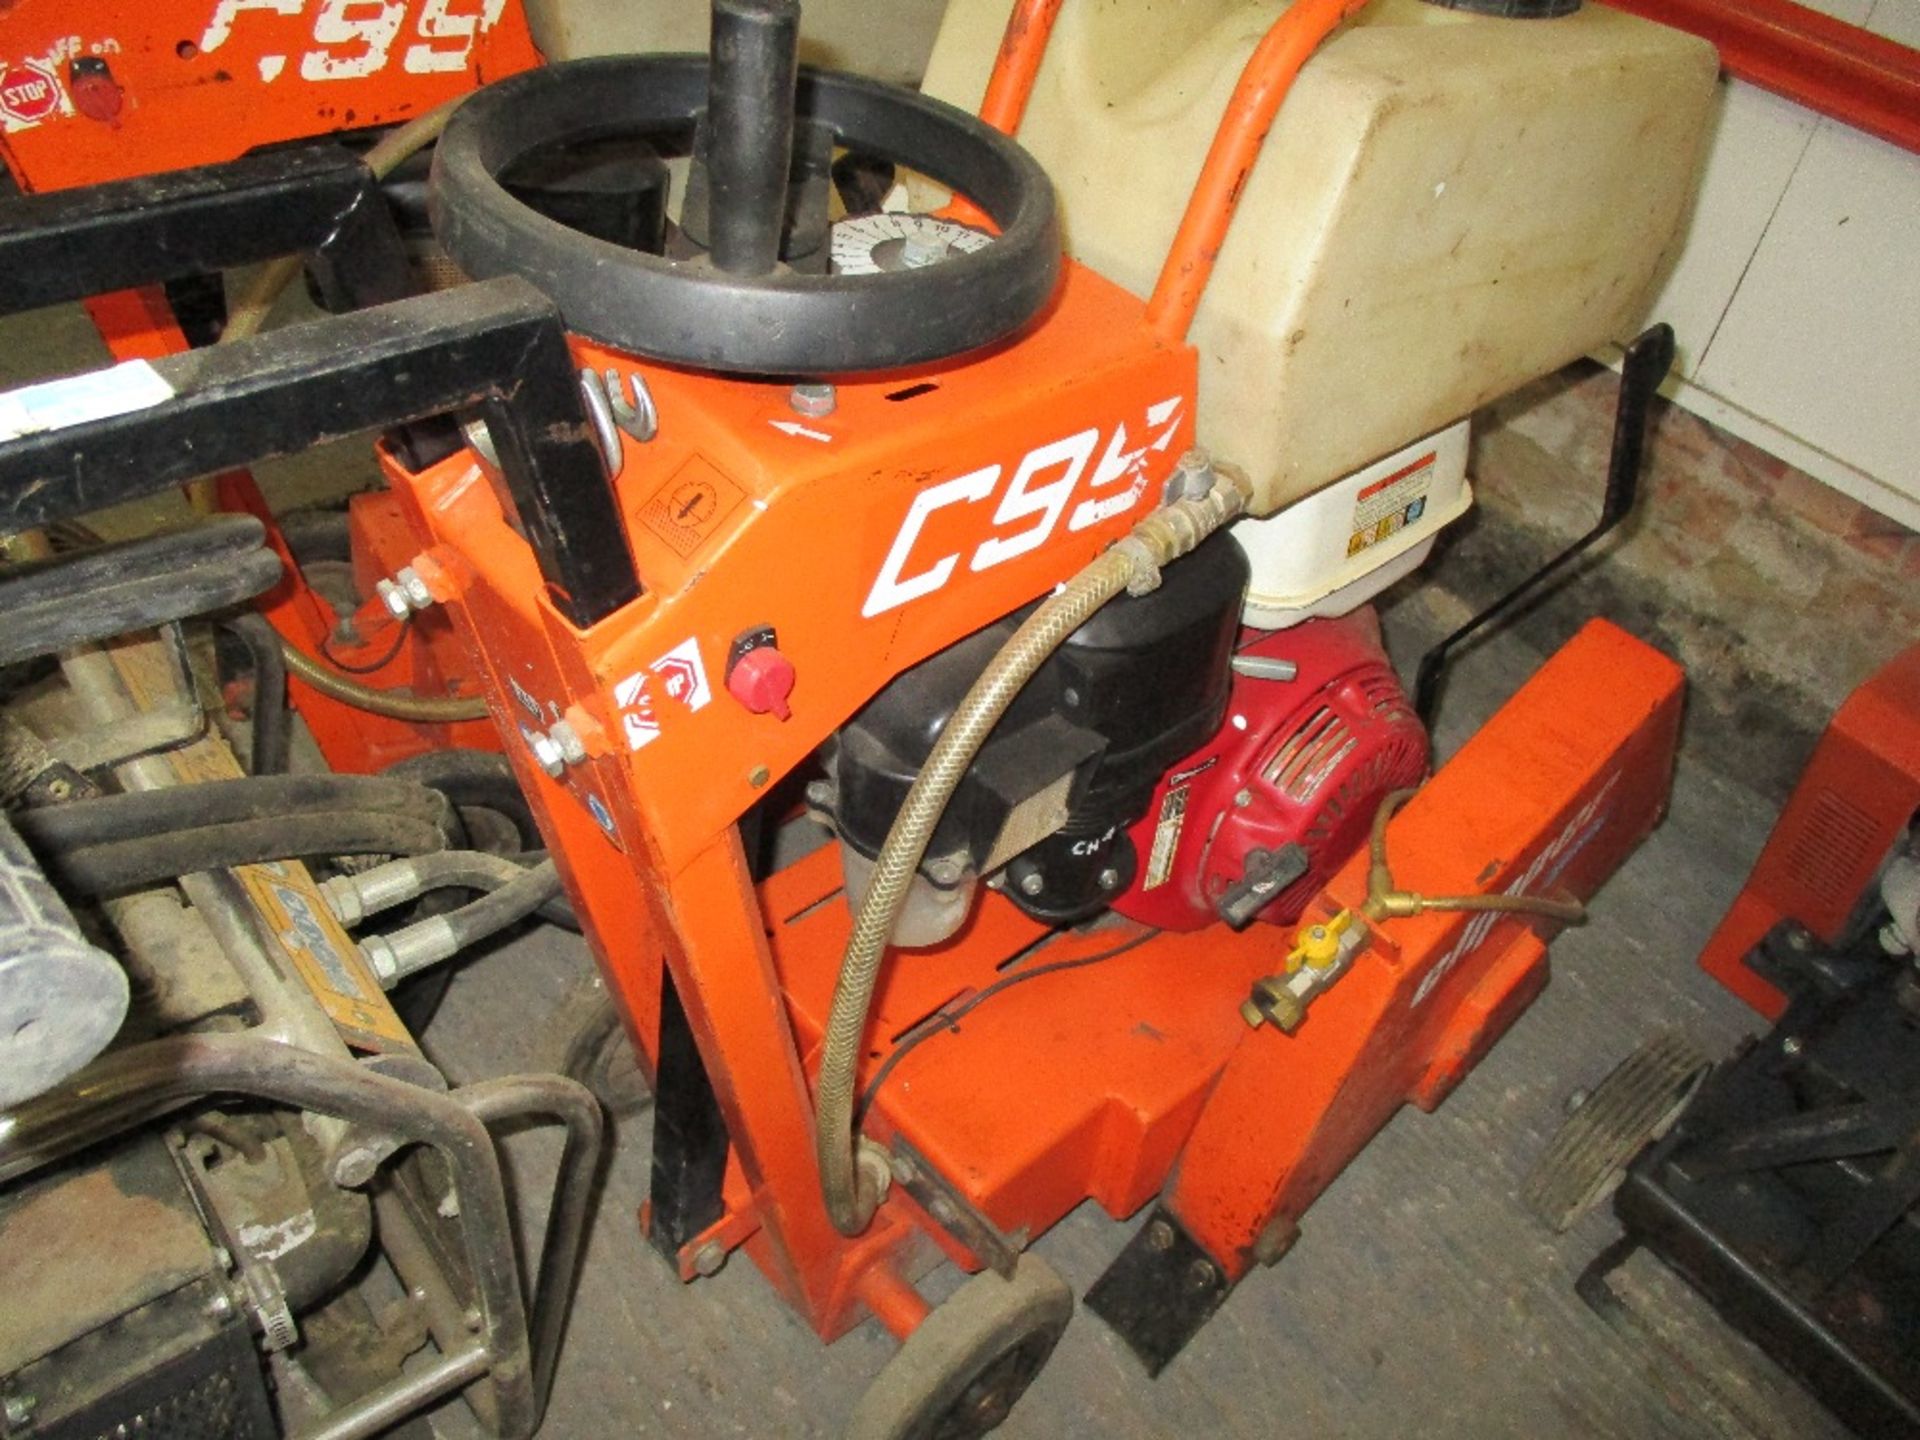 2 X CLIPPER C99 FLOOR SAWS...SOLD AS ONE LOT - Image 4 of 7